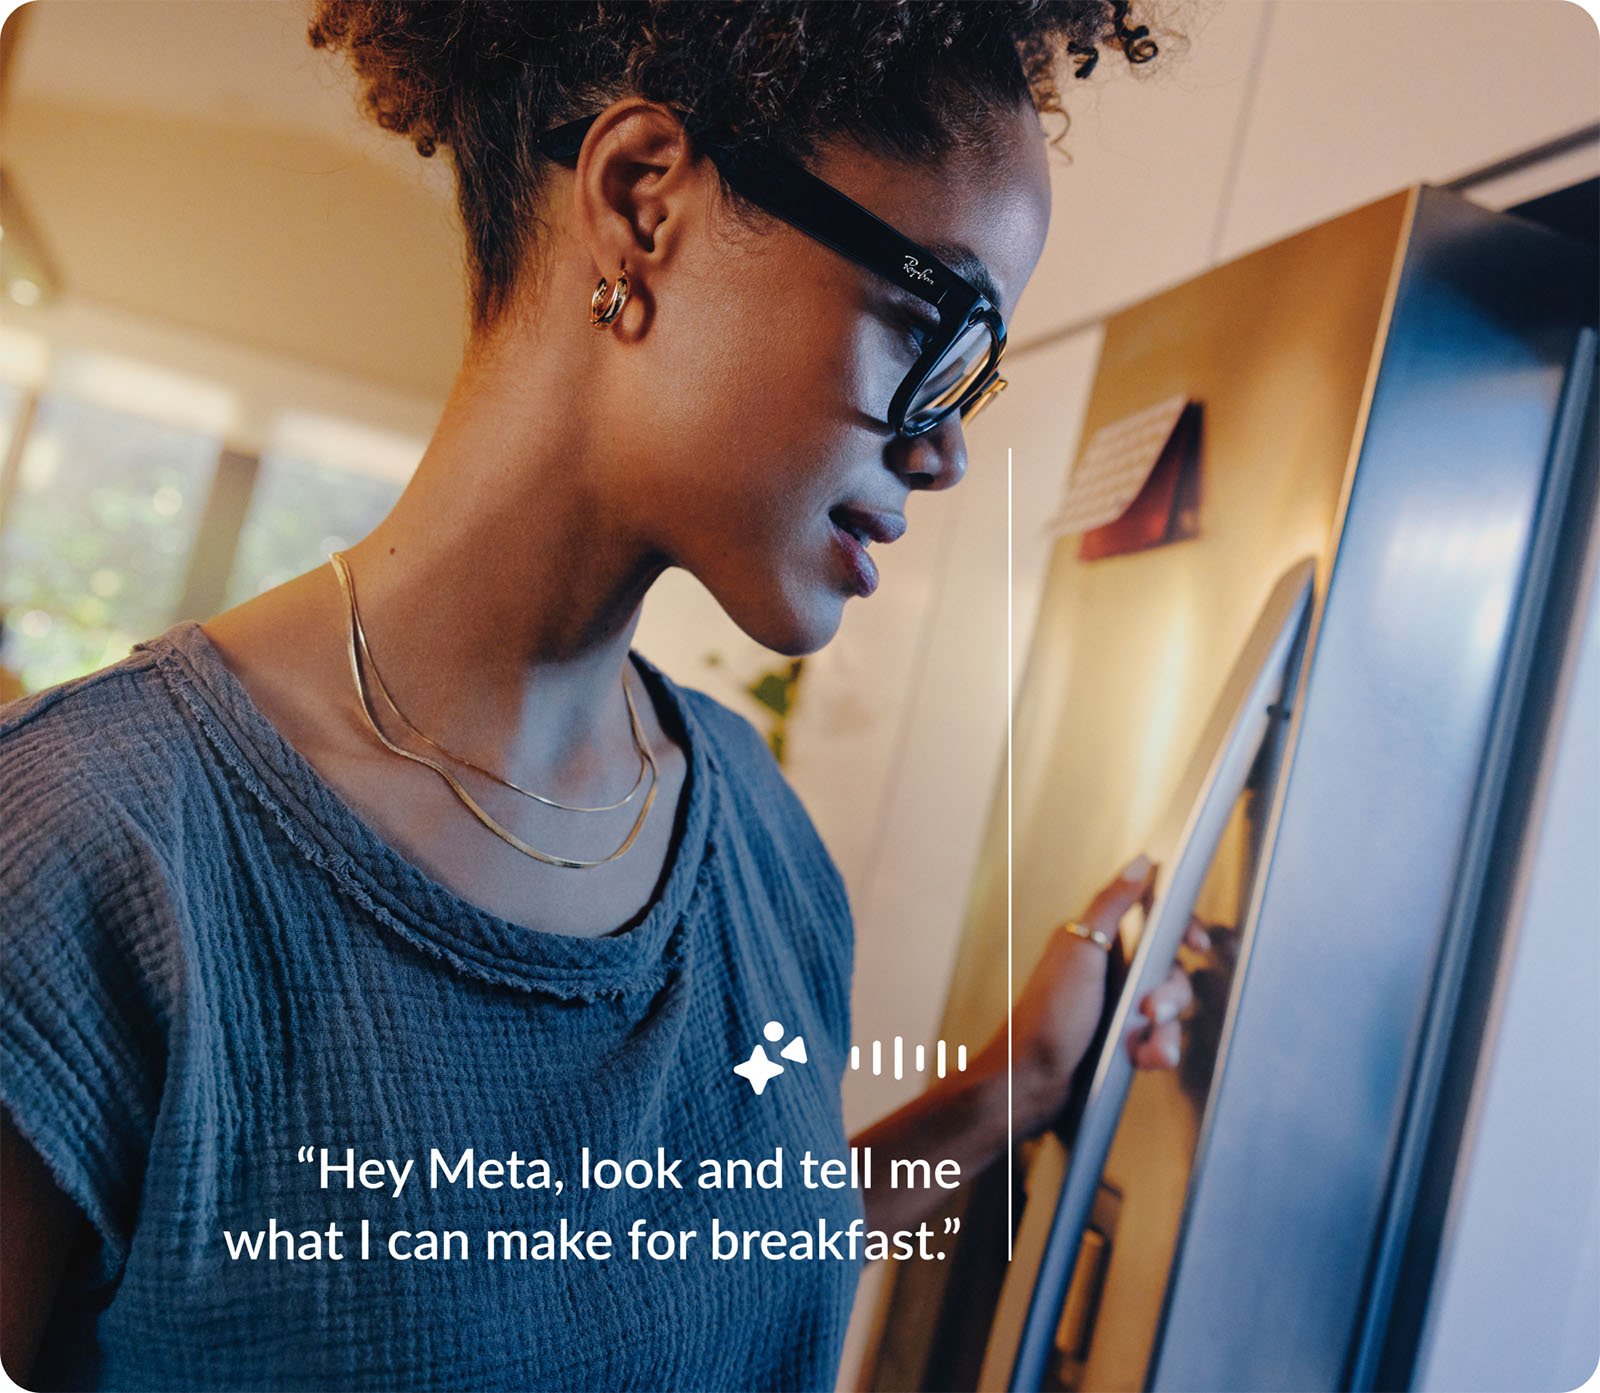 A woman wearing smart glasses speaks to her device while looking inside a refrigerator in a sunny kitchen, asking for breakfast suggestions.